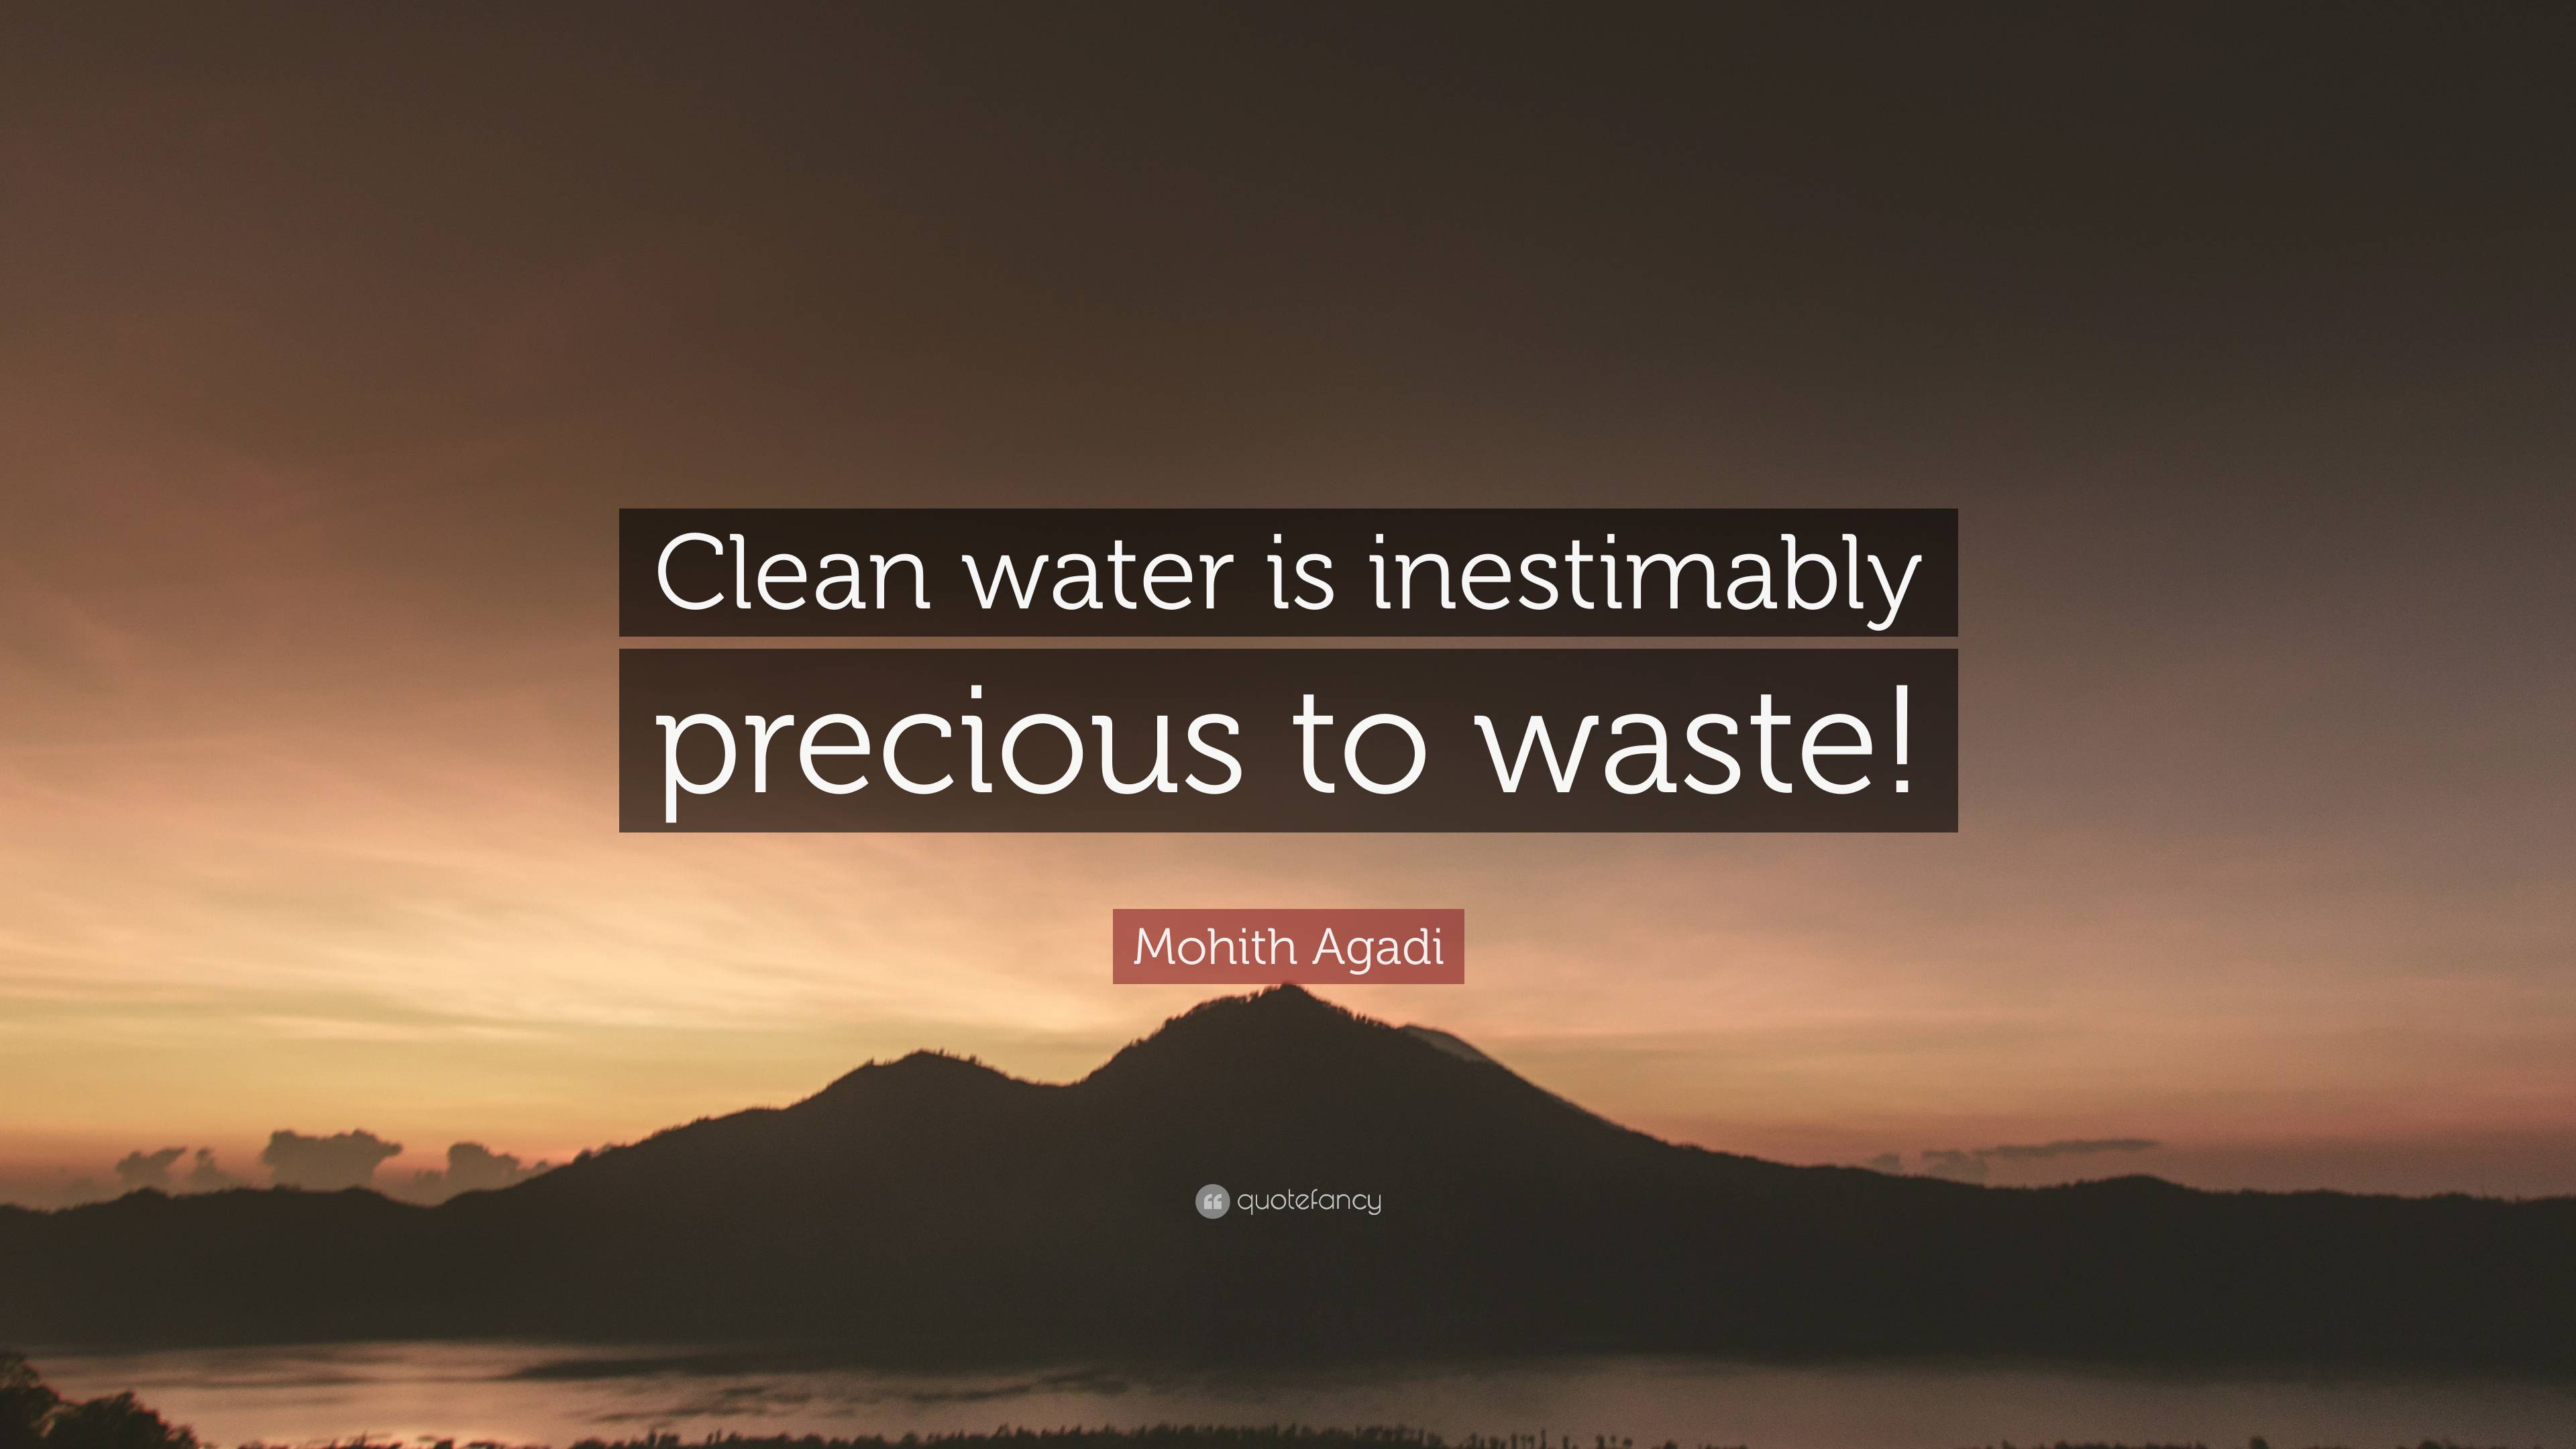 Mohith Agadi Quote: “Clean water is inestimably precious to waste!”